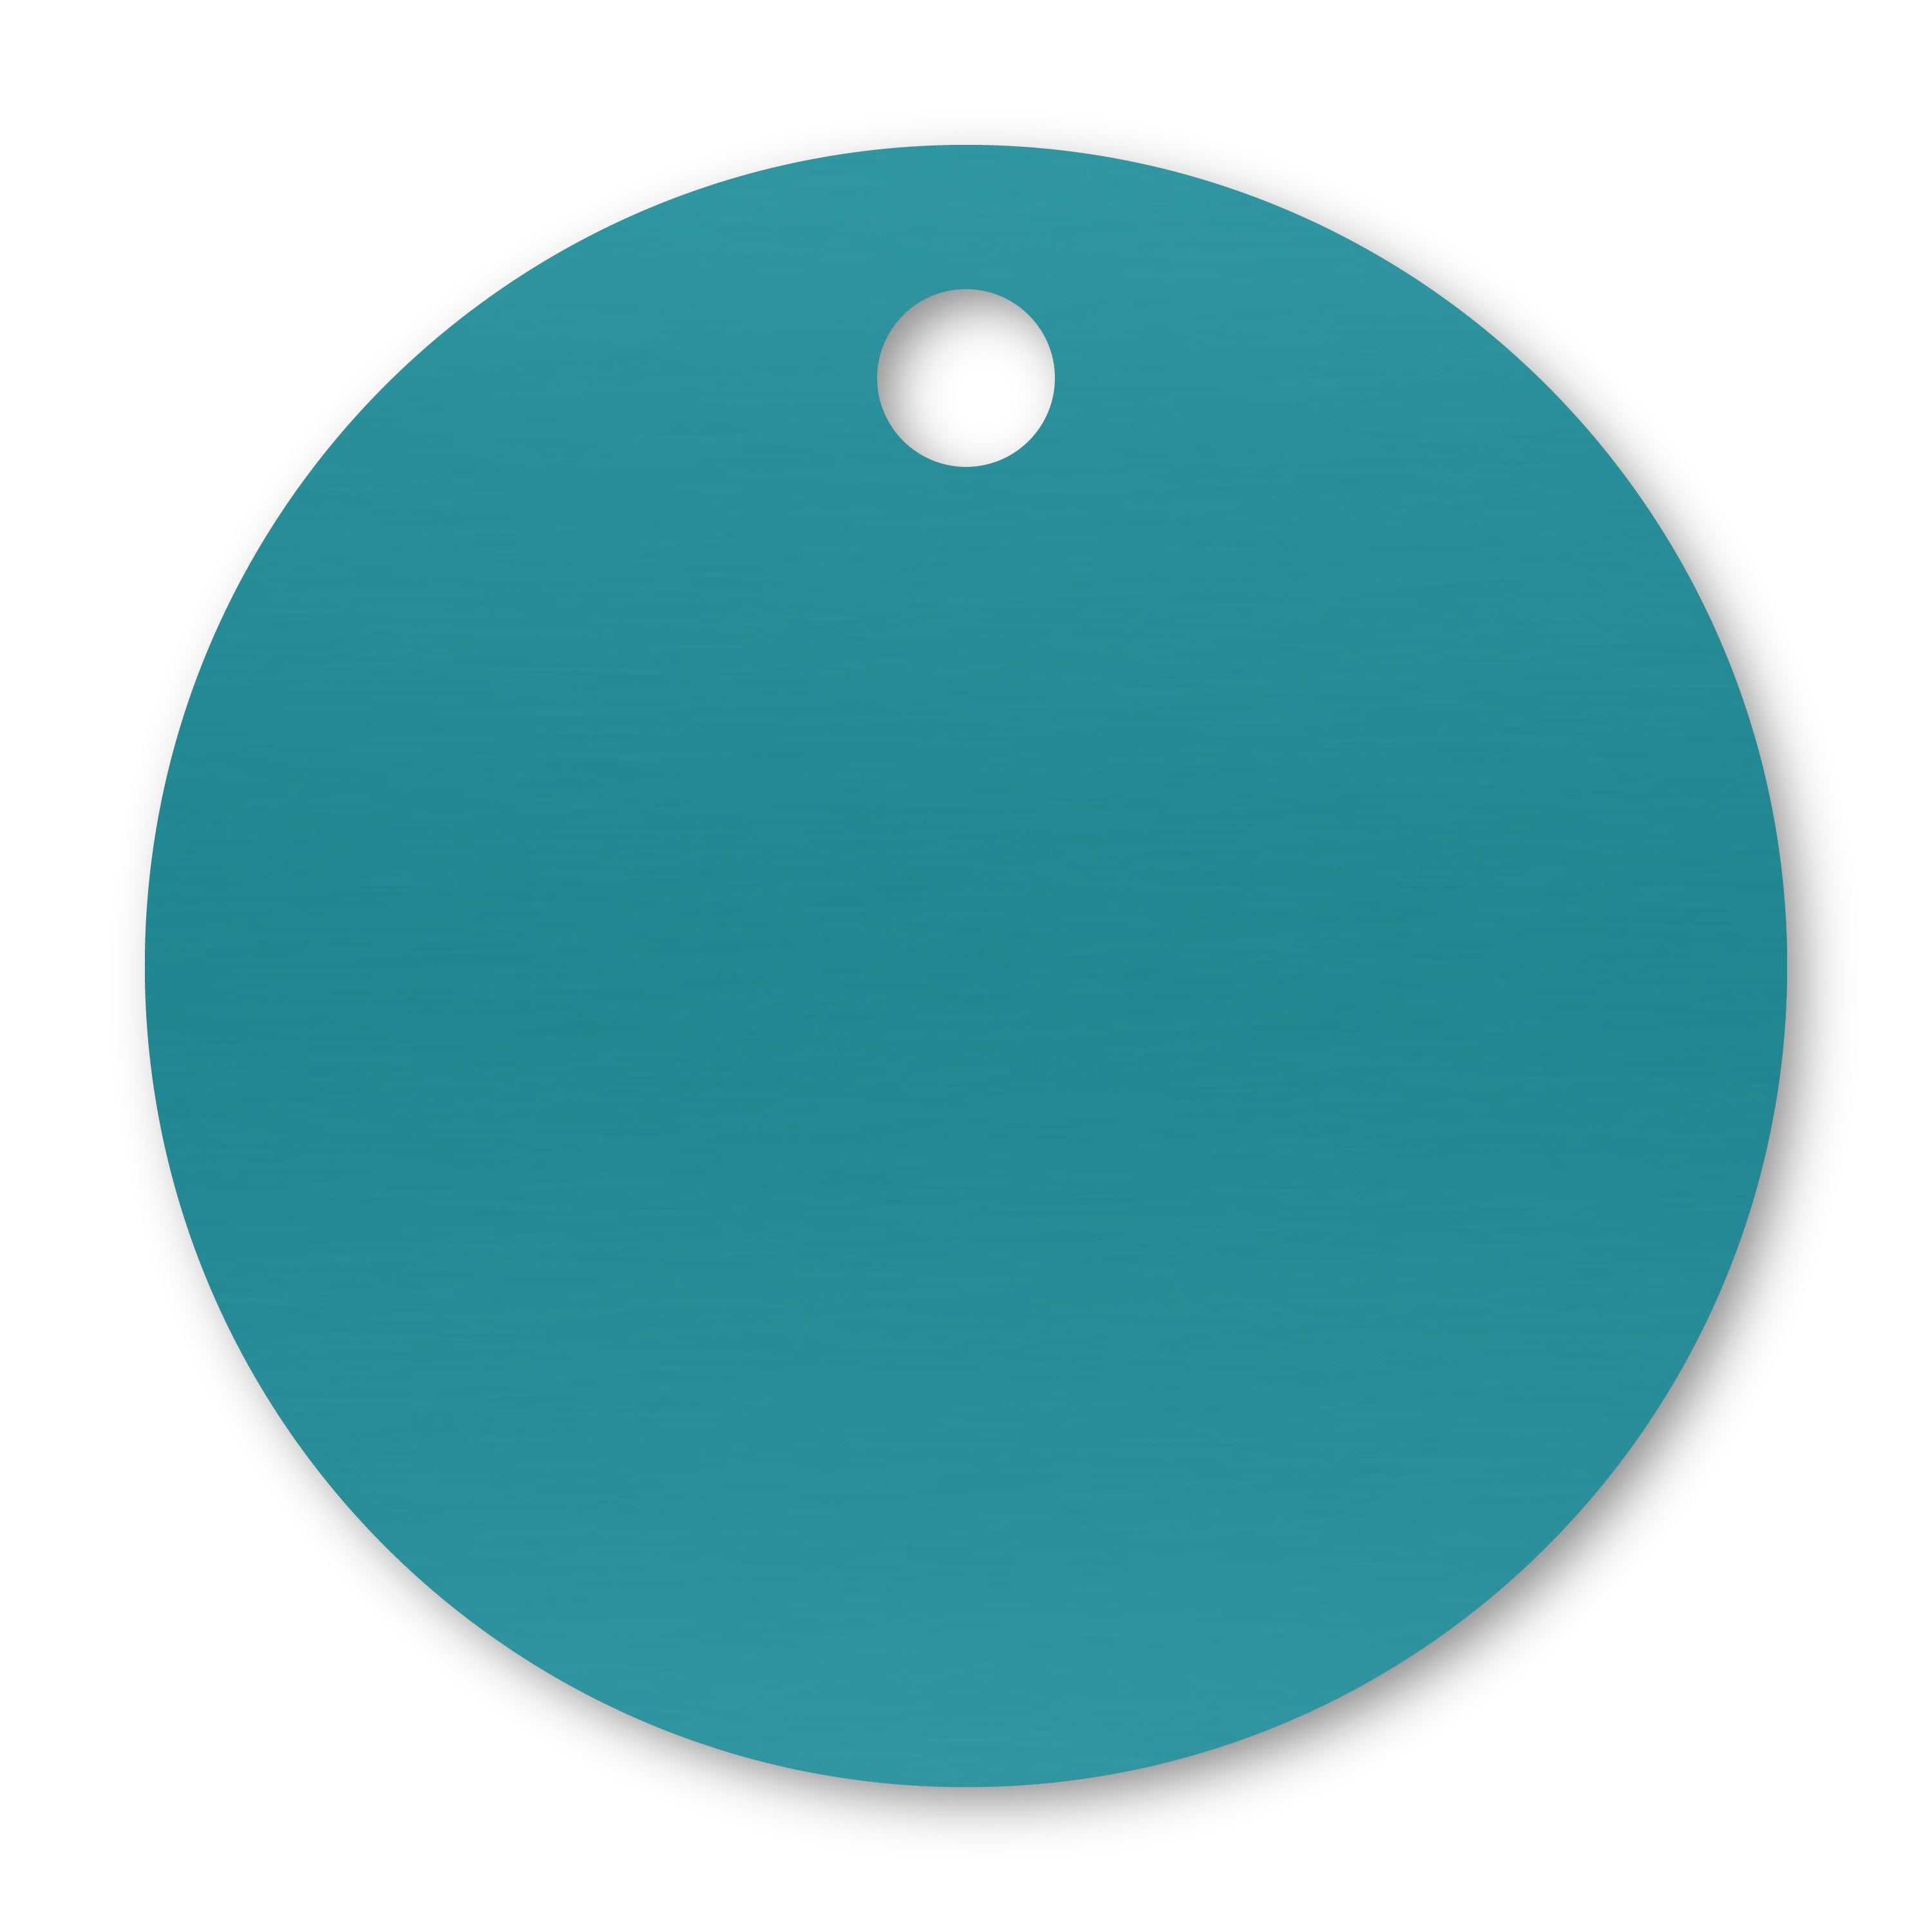 Anodized Aluminum Round Tags, 1-1/4" with 1/8" Hole, Laser Engraved Metal Tags Craftworks NW Turquoise 